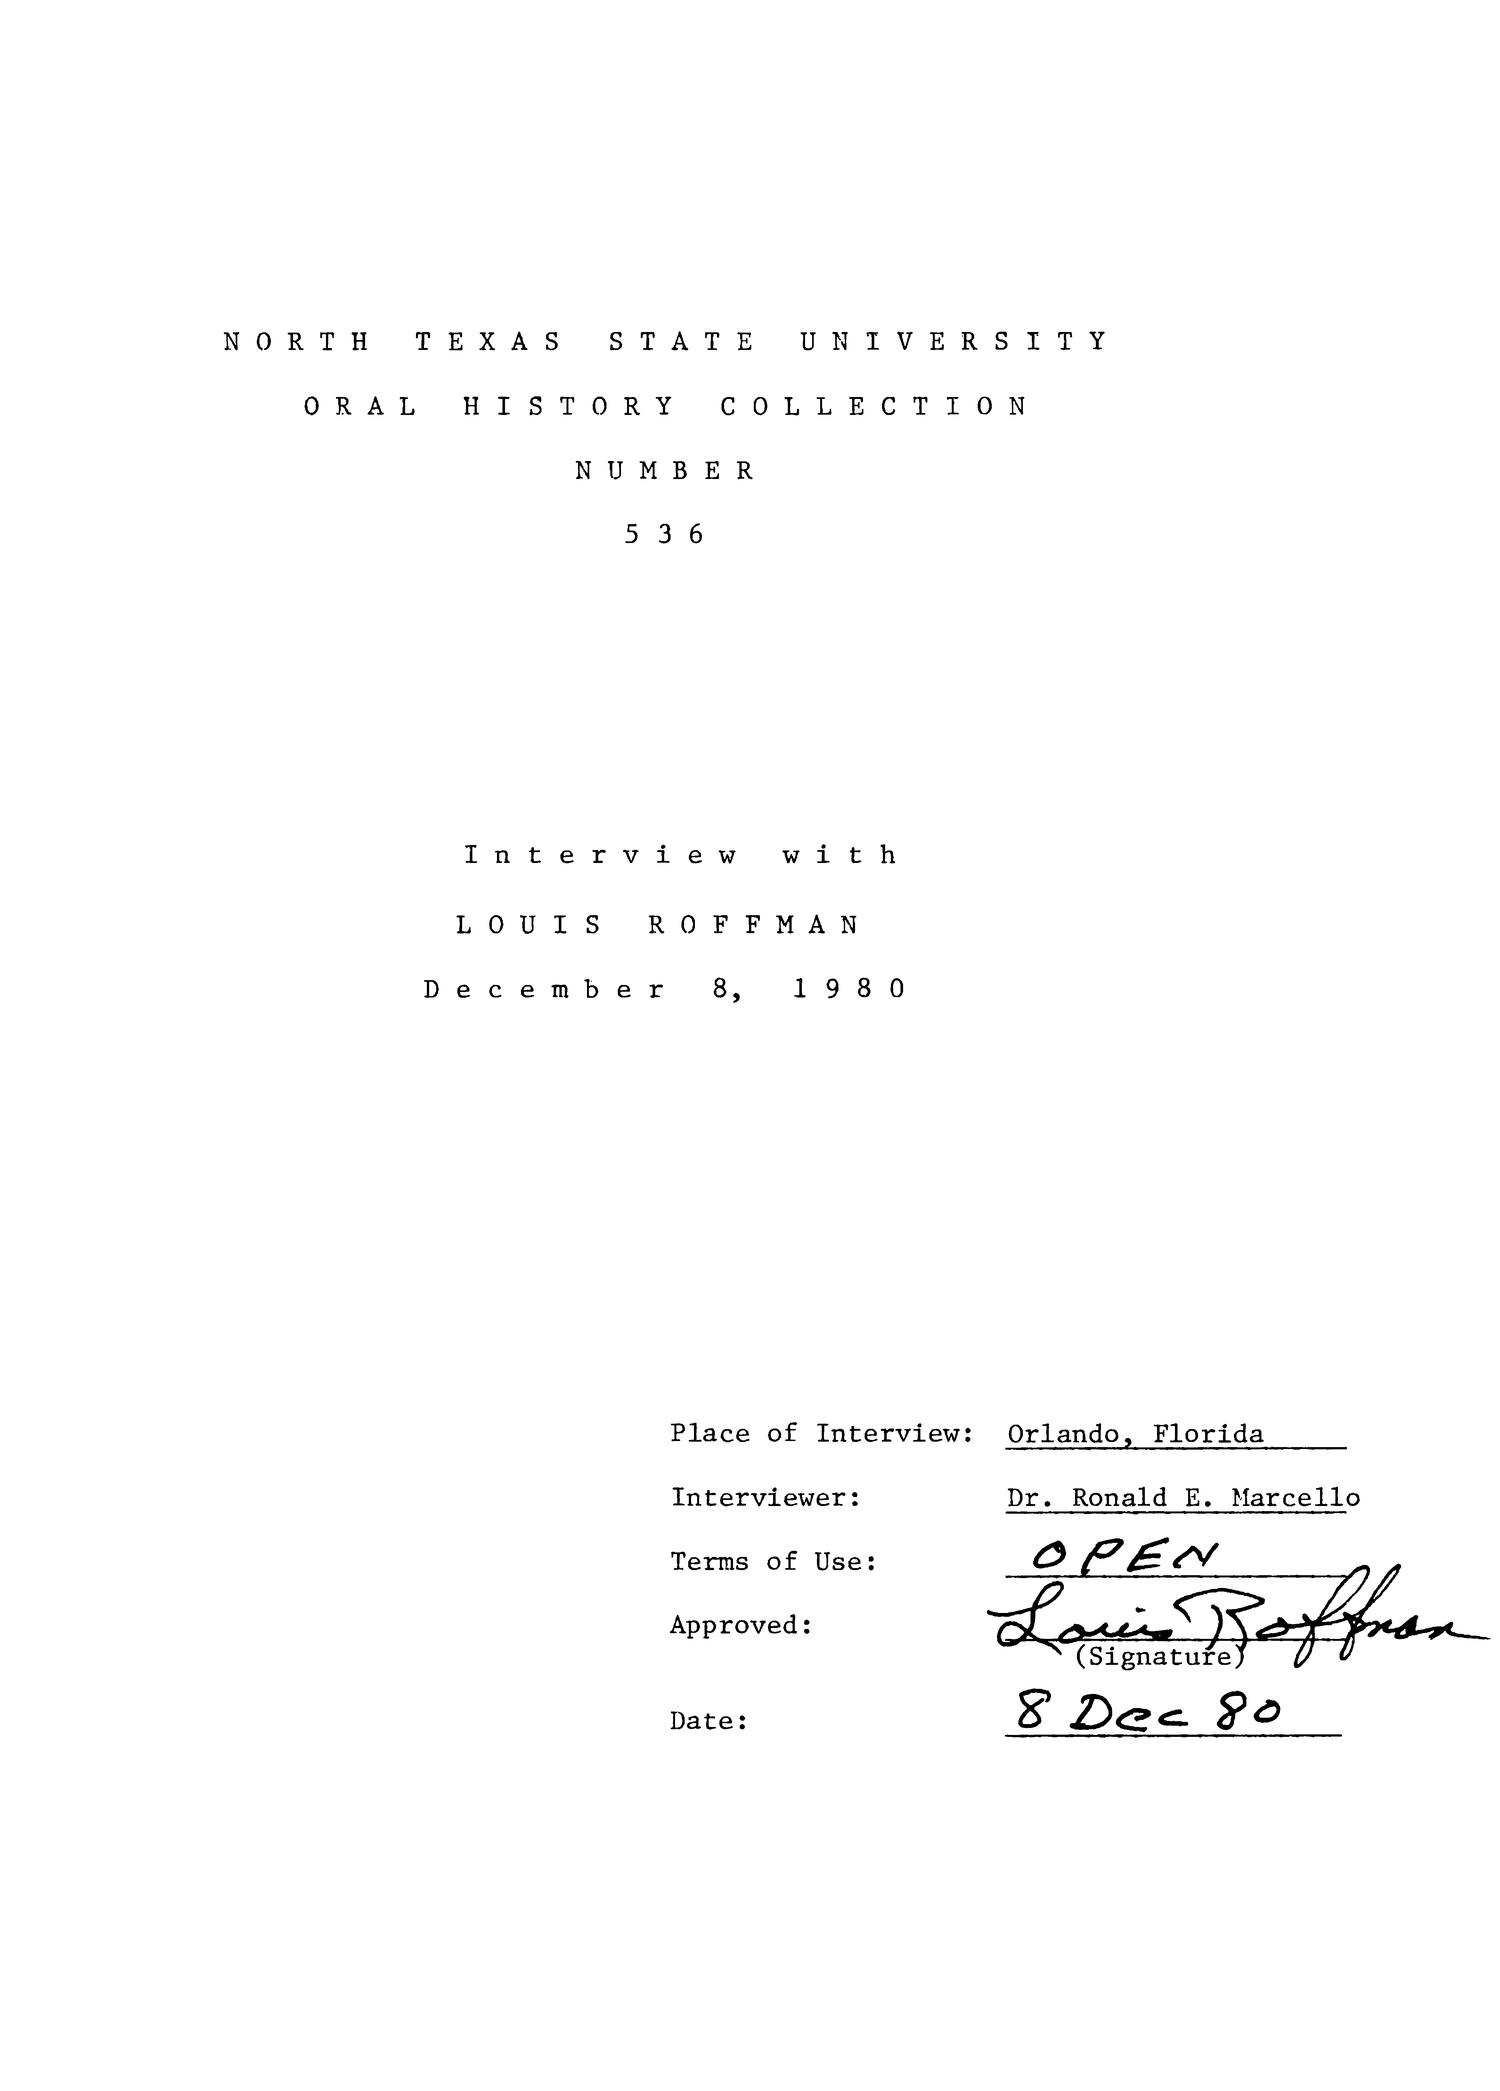 Oral History Interview with Louis Roffman, December 8, 1980
                                                
                                                    Title Page
                                                